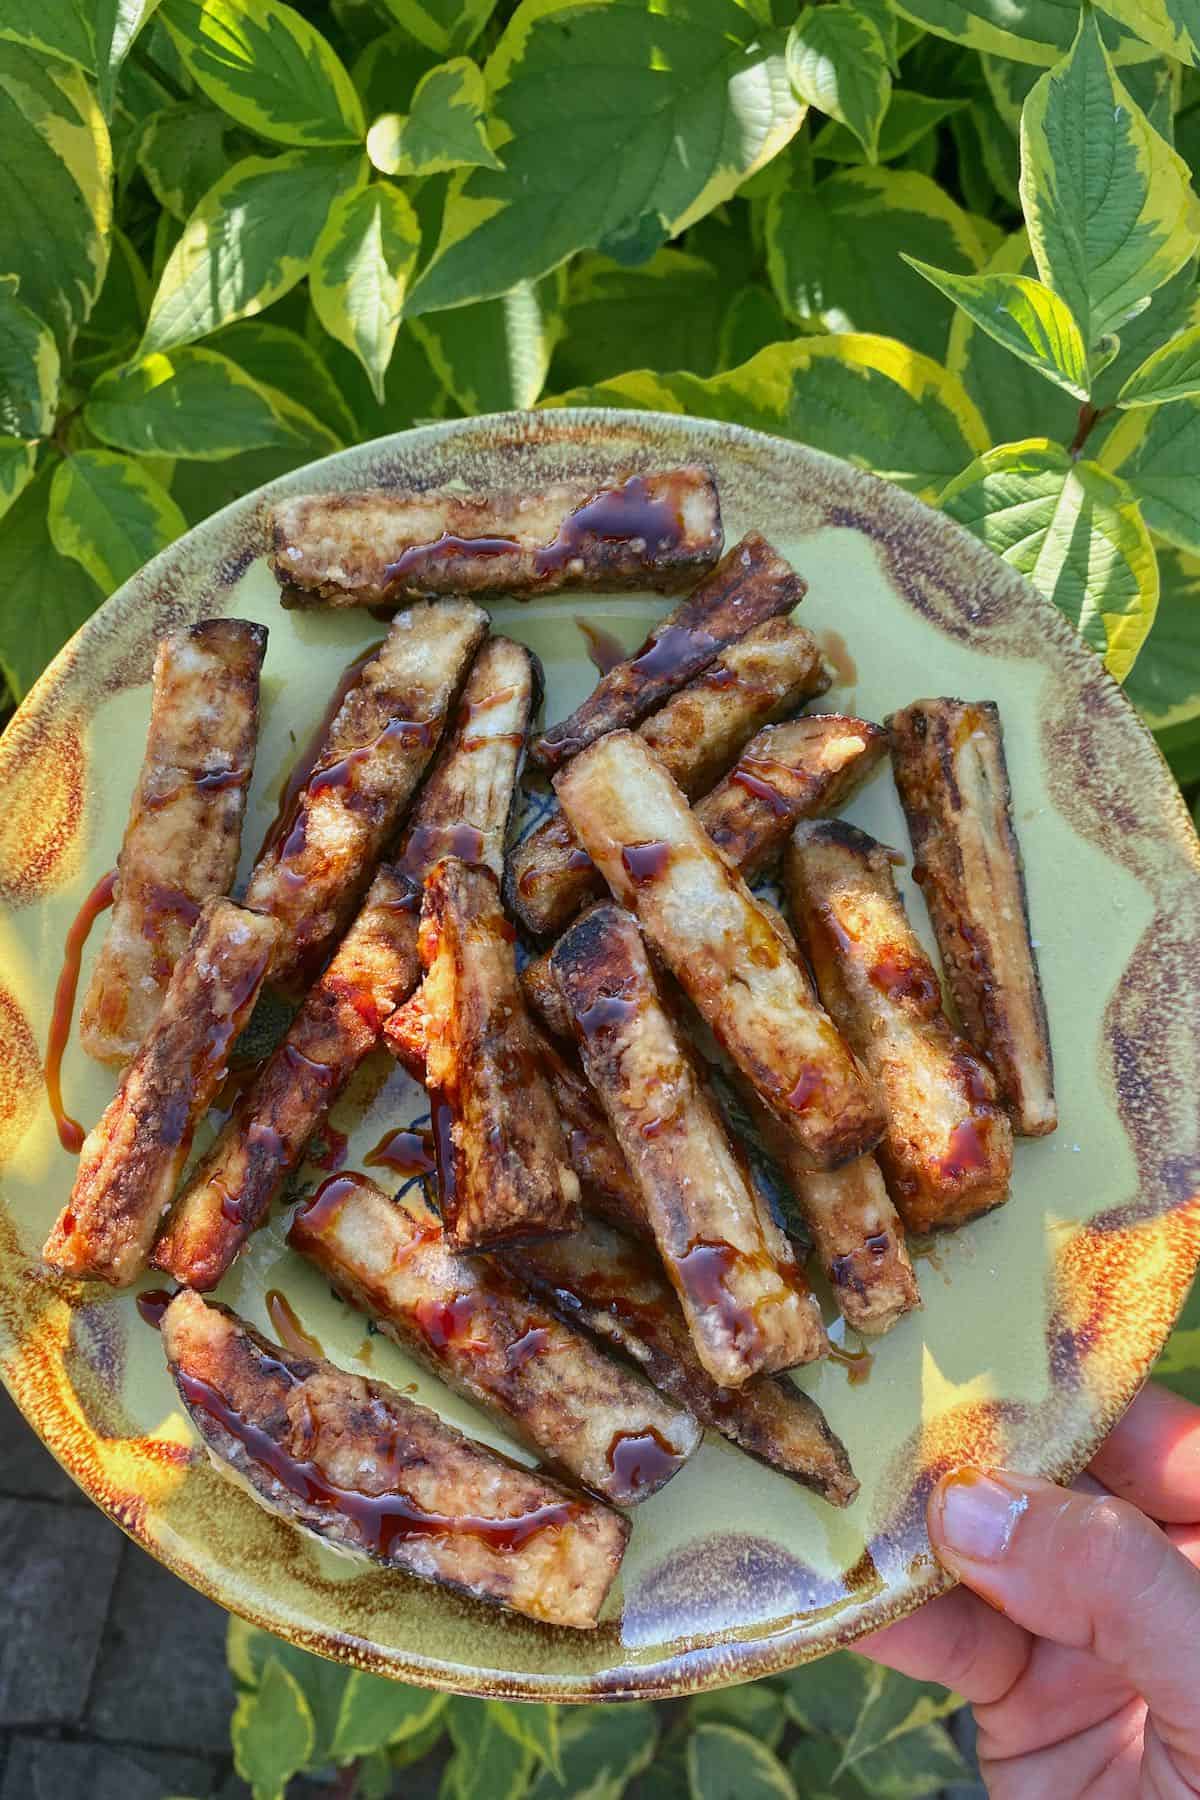 Eggplant fries drizzled with black honey